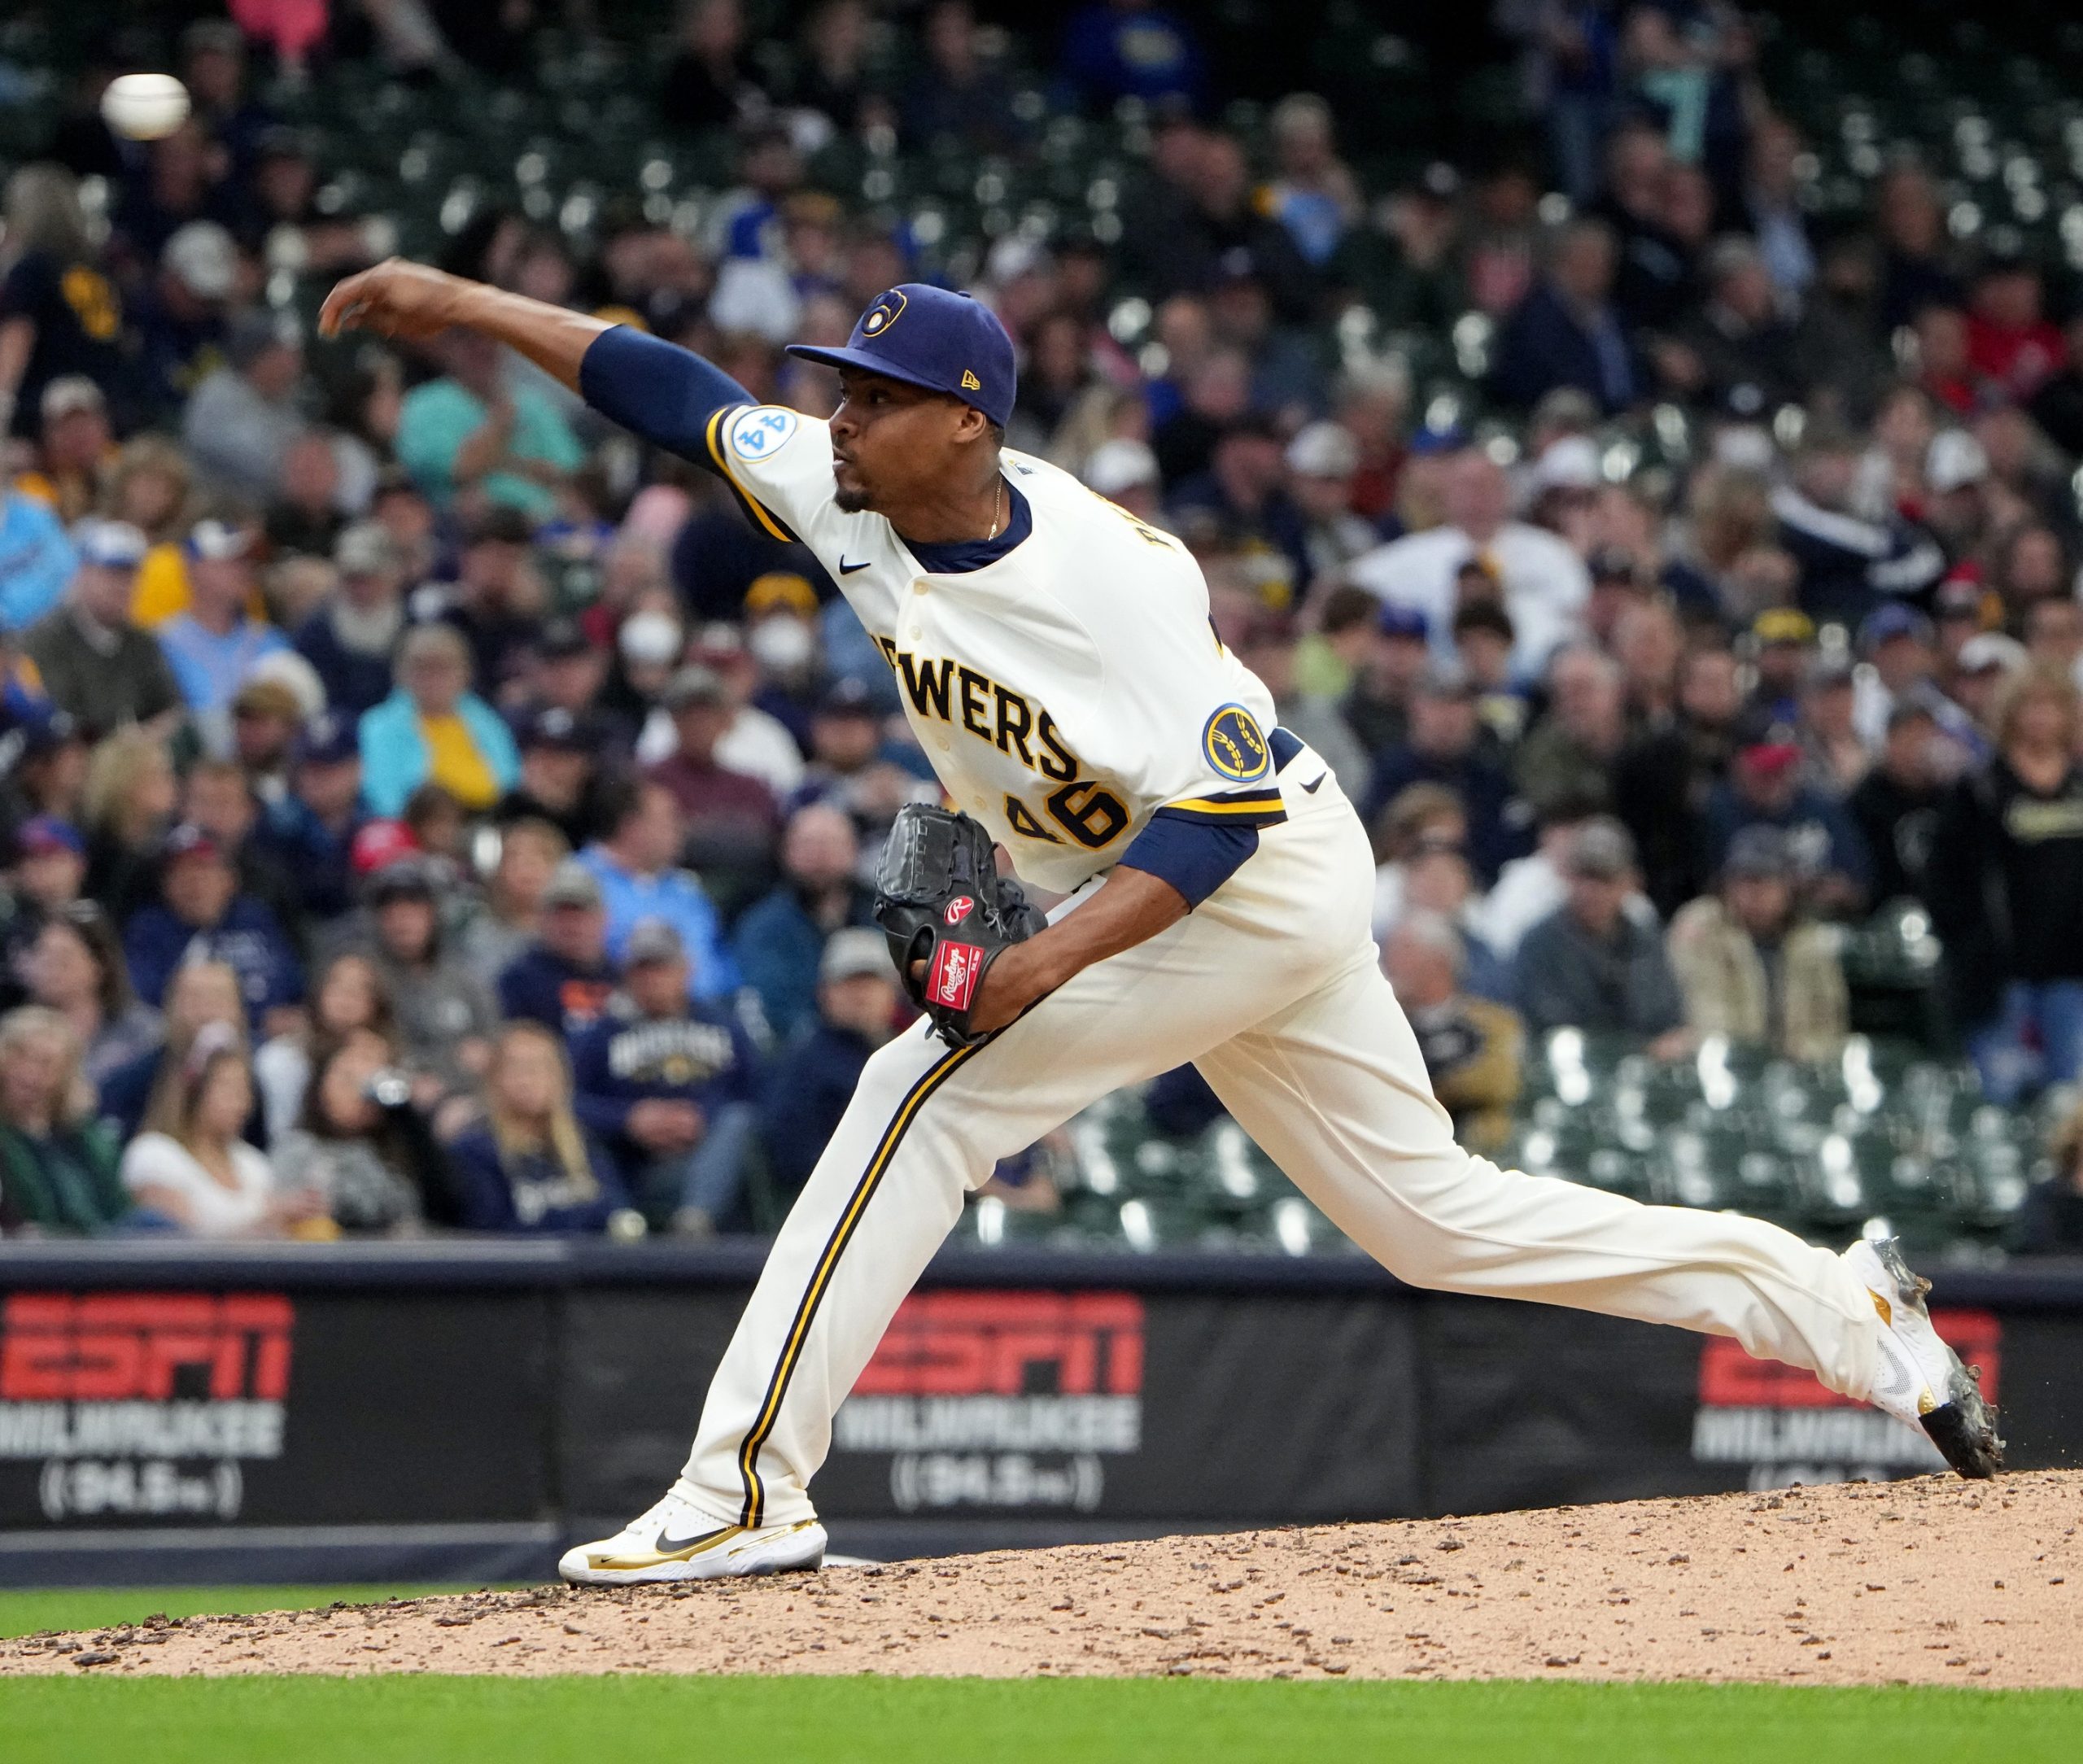 Brewers storm back for victory, send Pirates home empty-handed